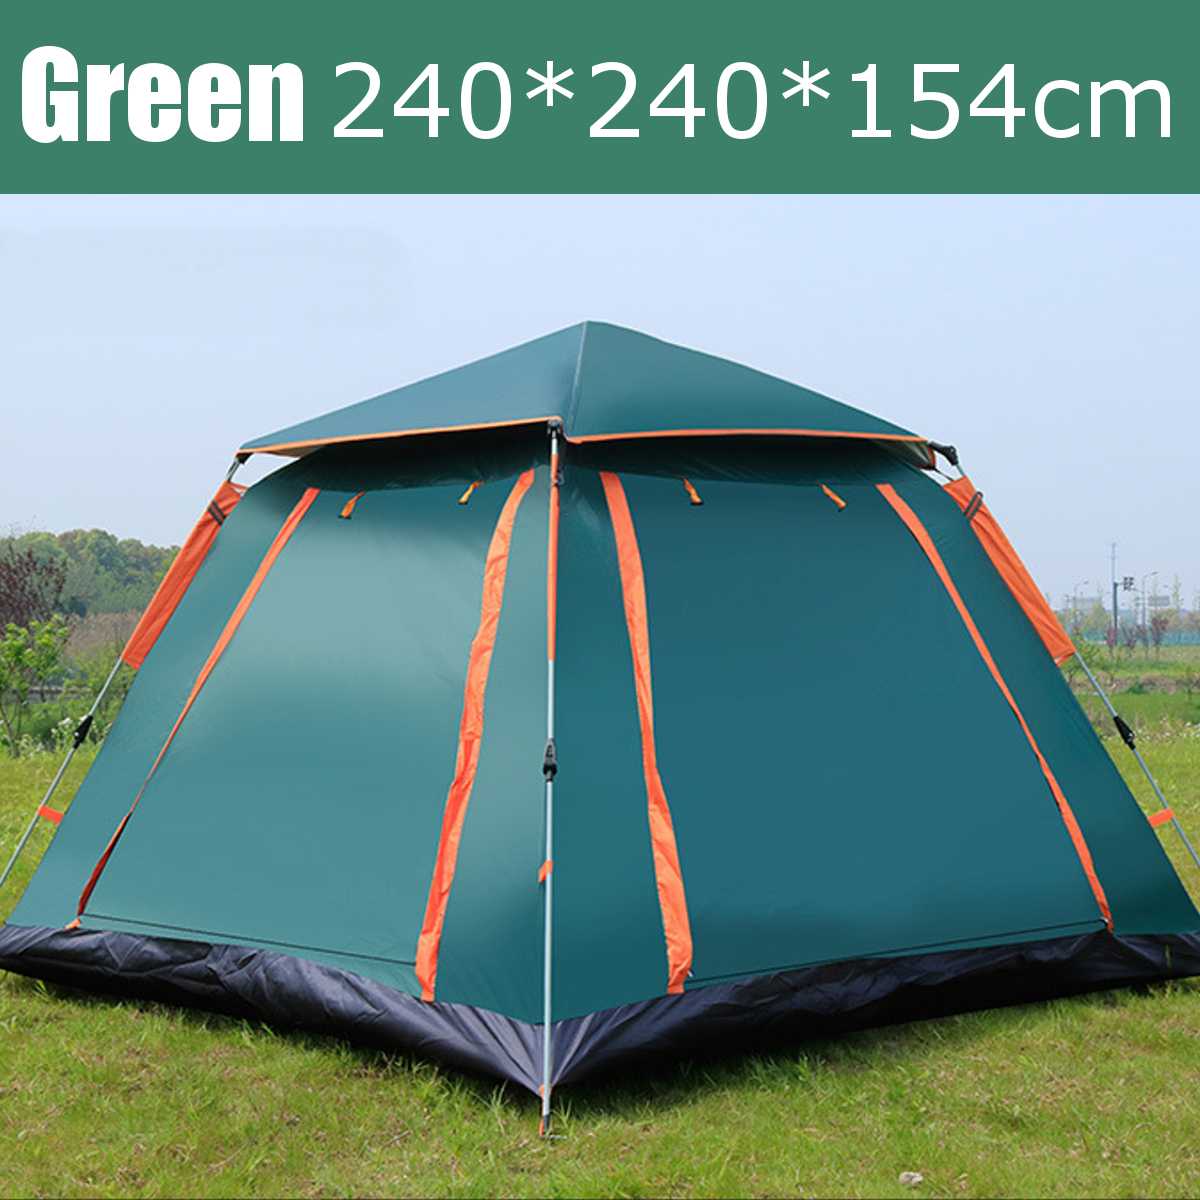 Cheap Goat Tents 6 7 People Large Tent Quick Setup Family Tent Outdoor Camping tent foldable folding tents two layer backpack tents sunshade Tents 